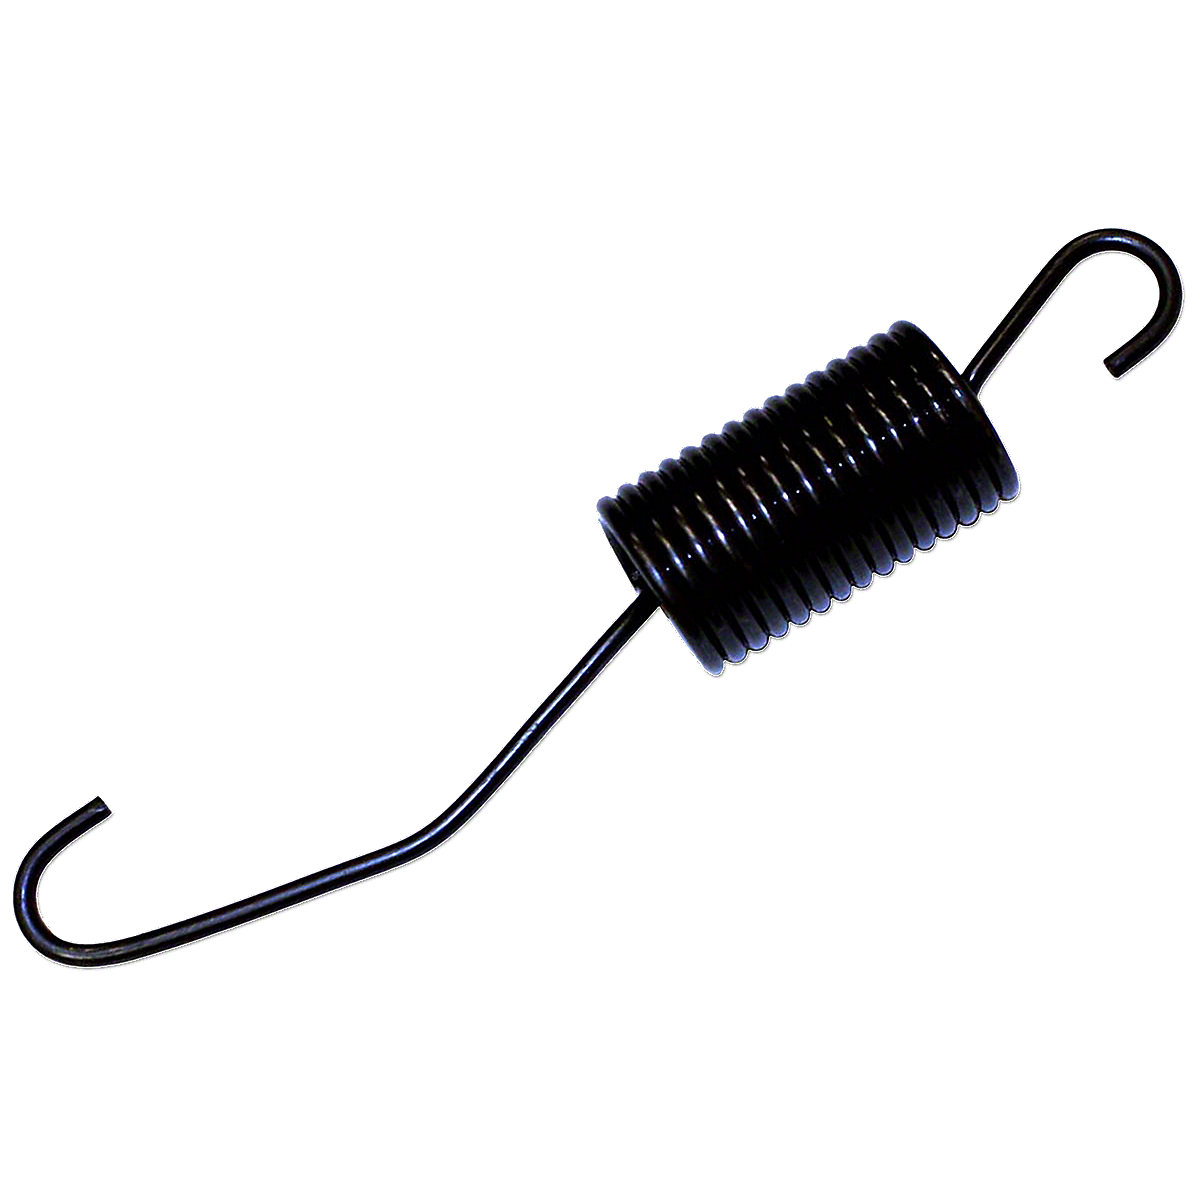 Throttle Return Spring For Allis Chalmers:WD, WD45 Gas.